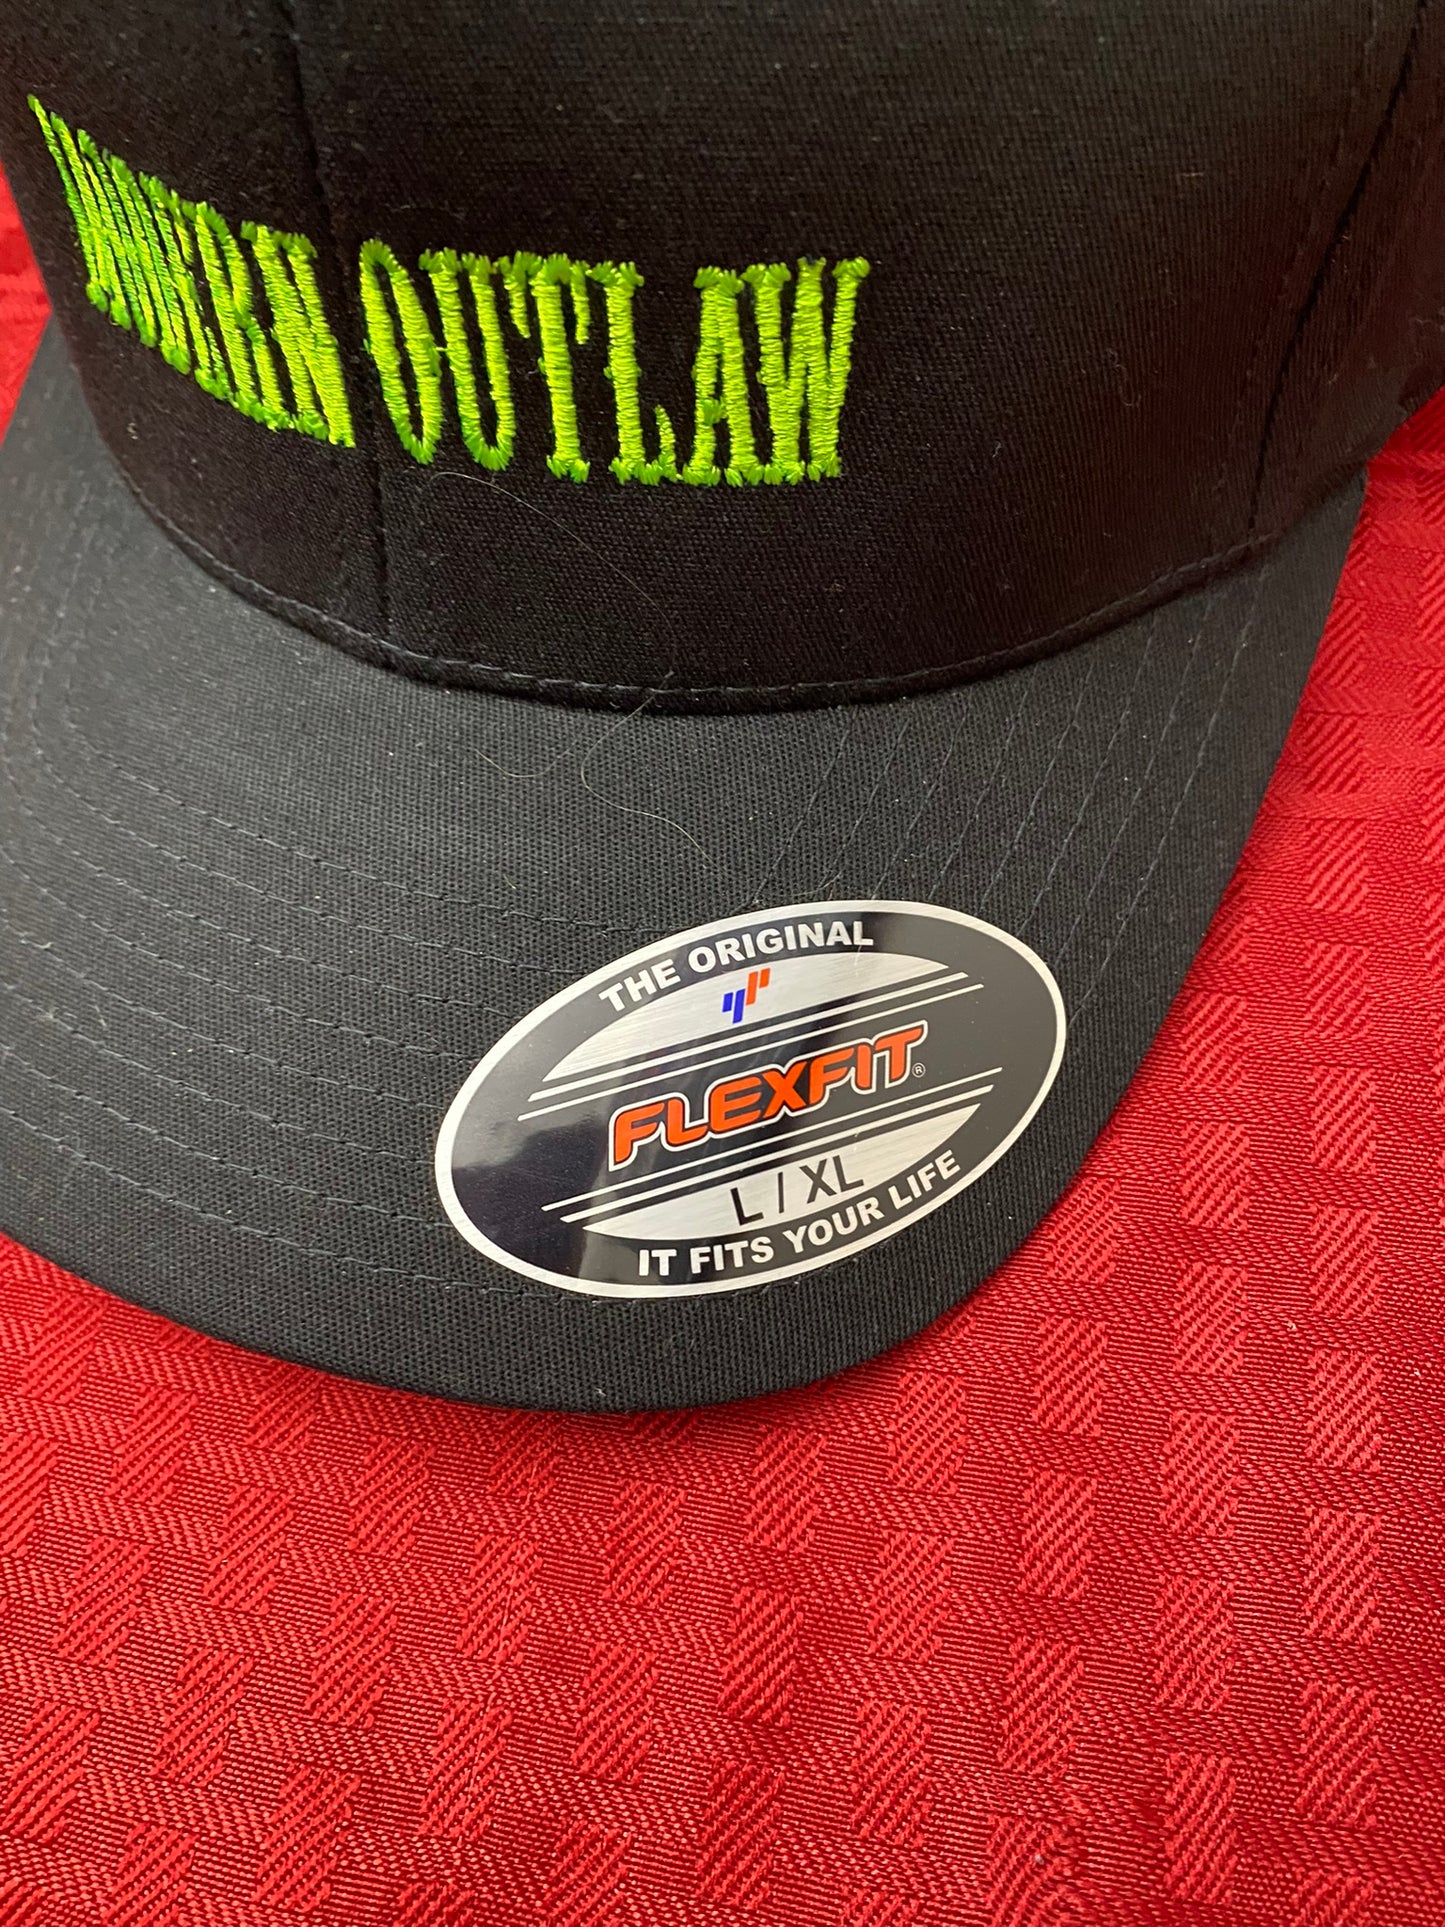 Modern Outlaw - Live by Your Own Rules Flex Fit Cap Neon Green Embroidery